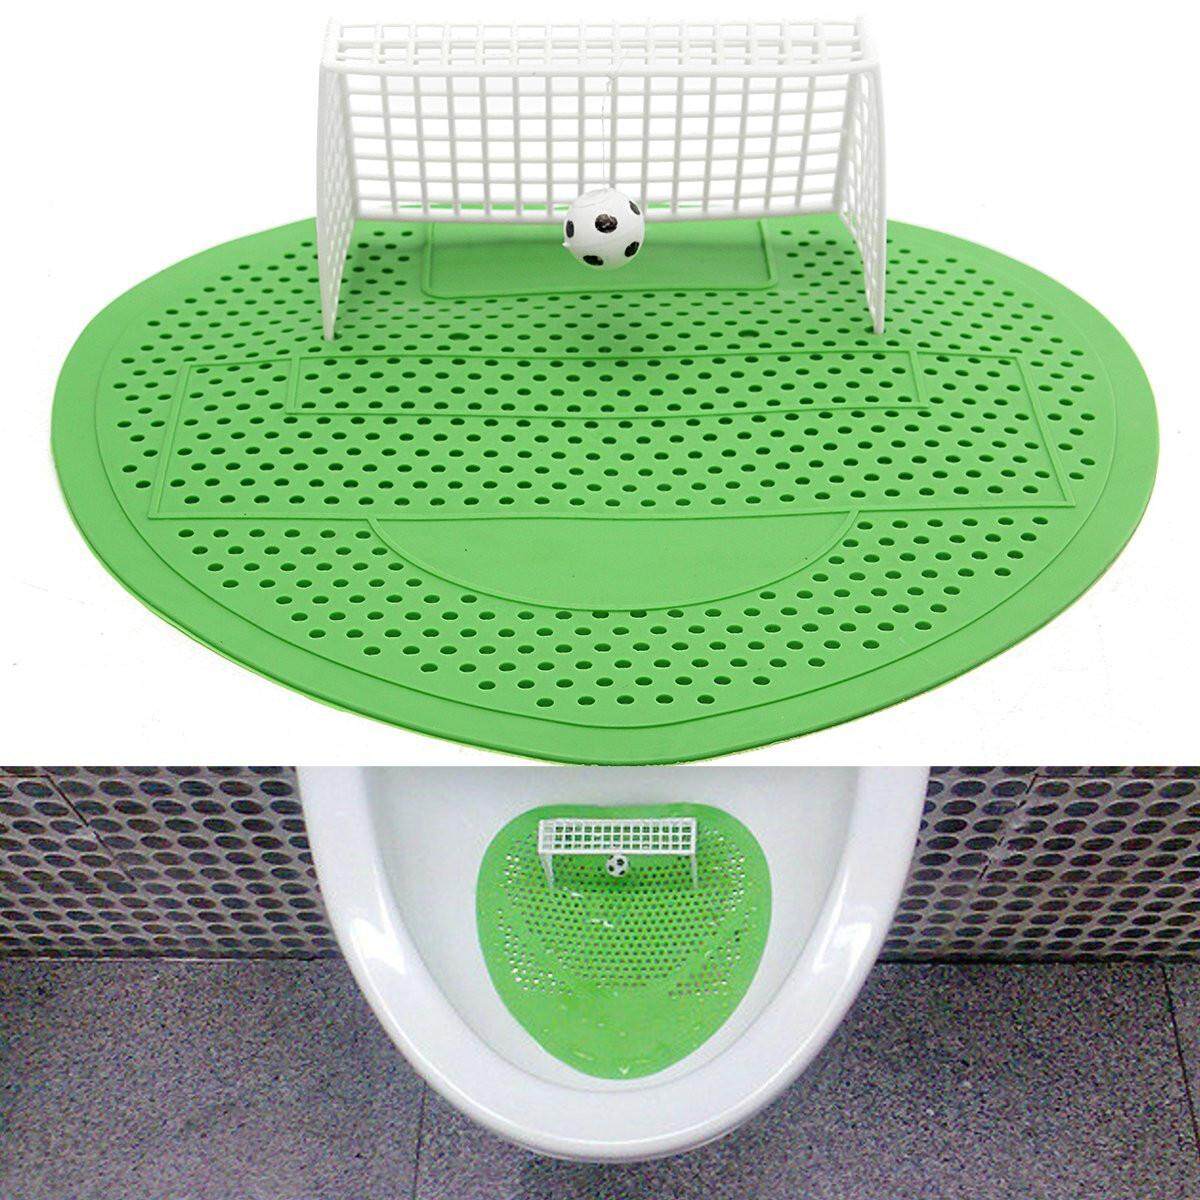 Football Soccer Shoot Goal Style Urinal Screen Filter Mat For Hotel Home Club